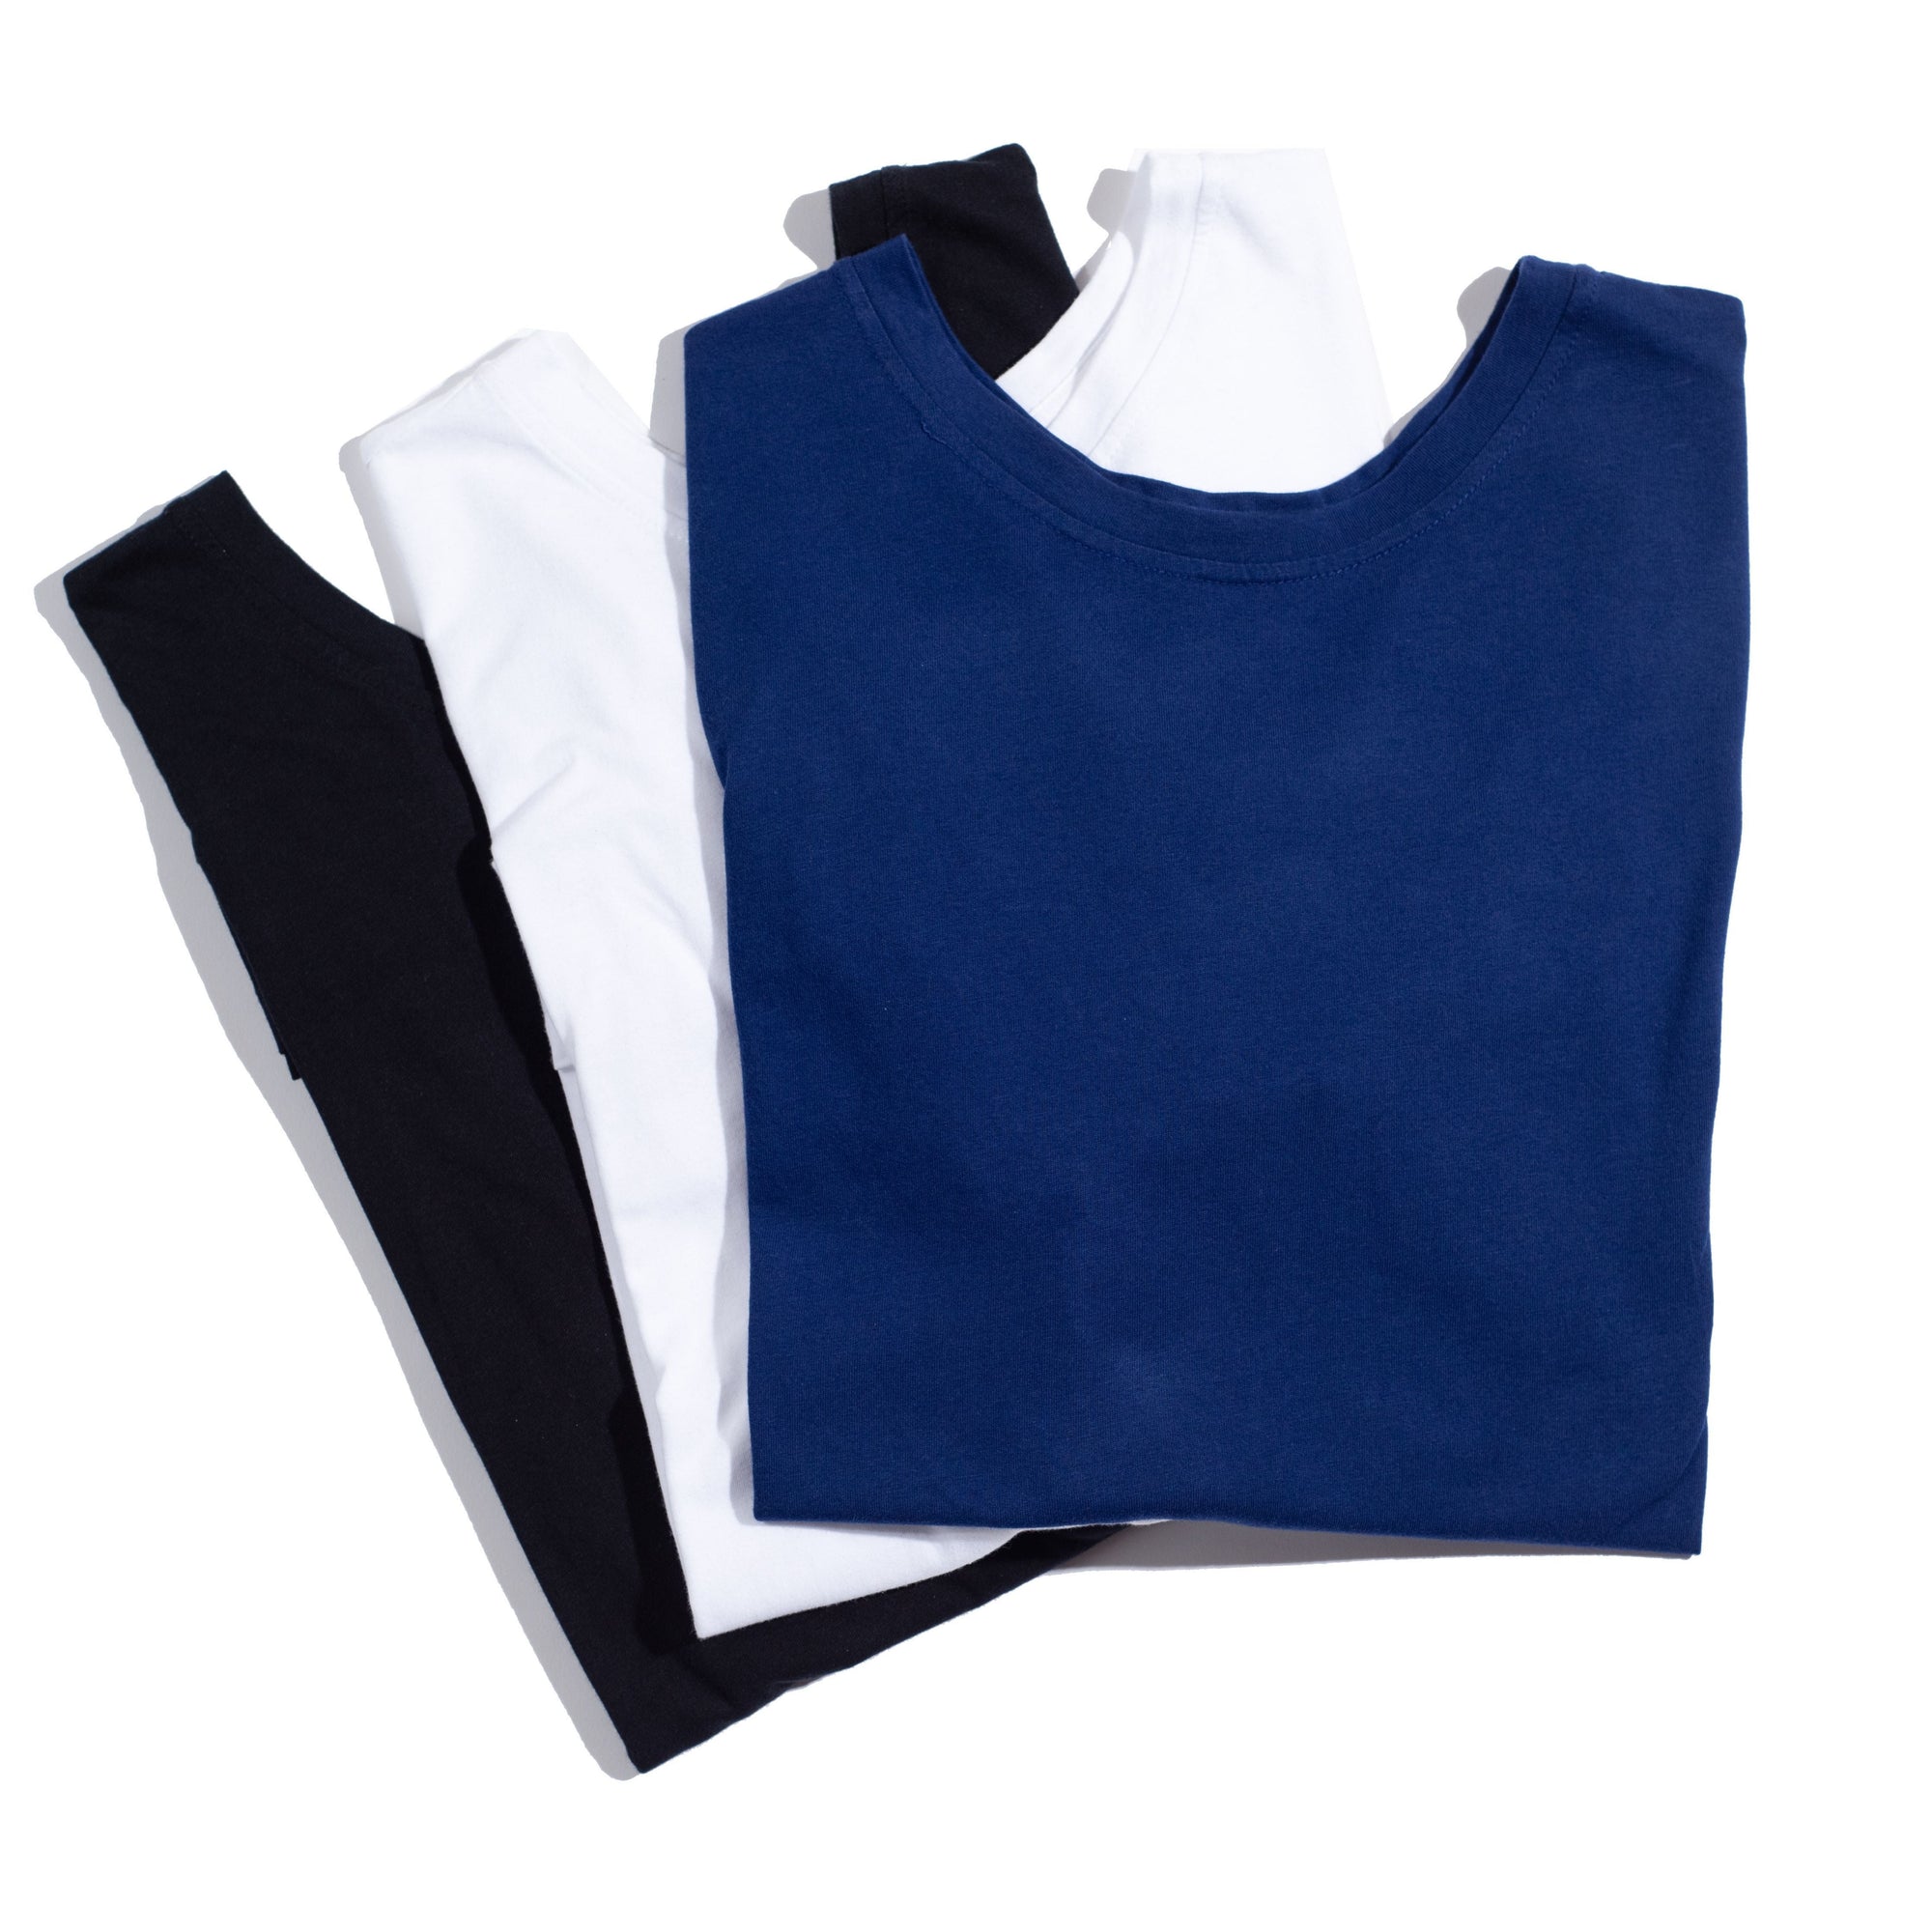 The Side Fastening T-Shirt T-shirt - The Shapes United